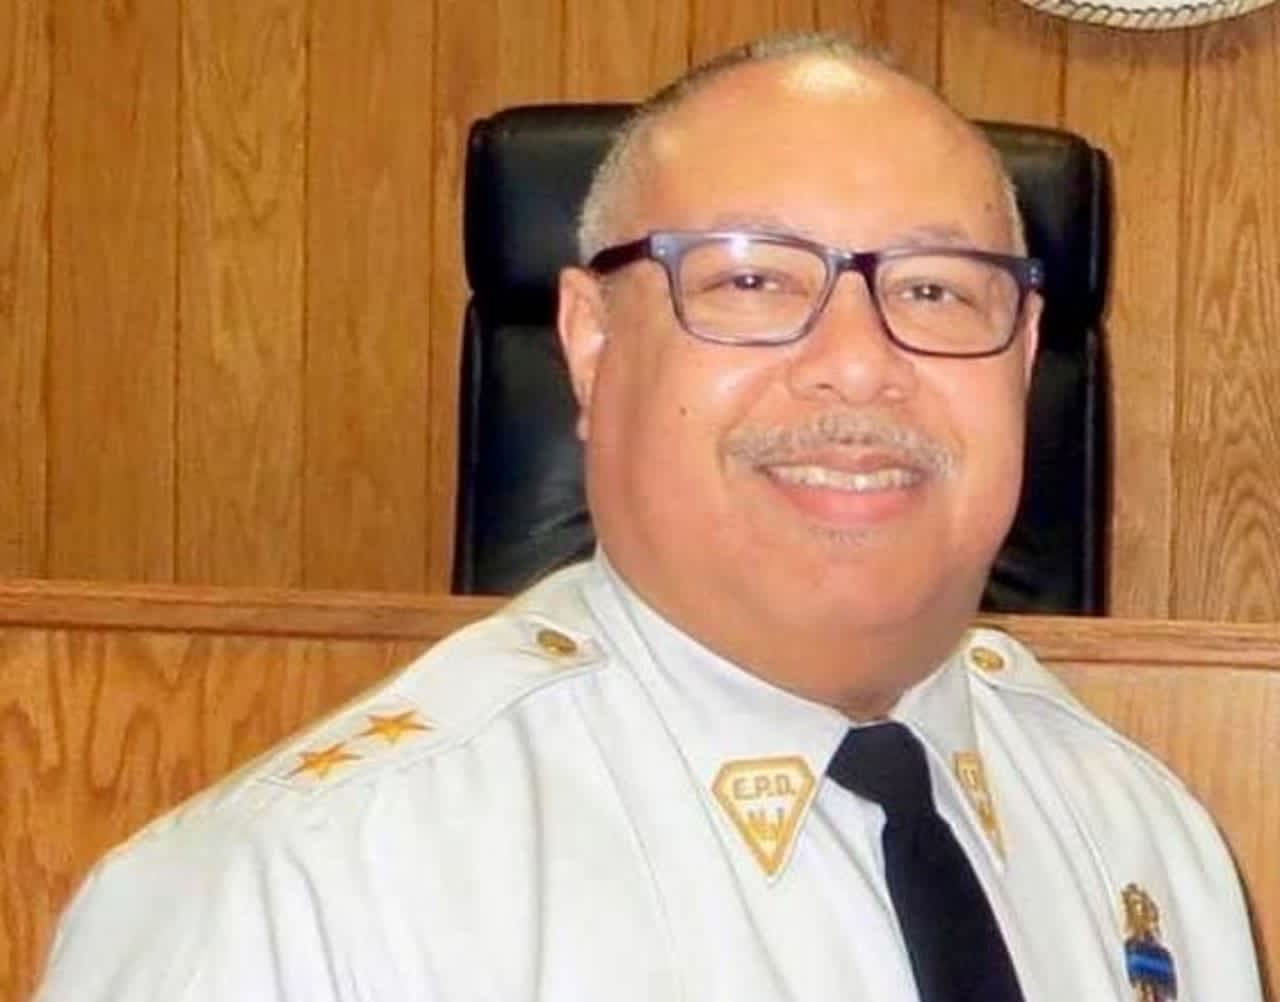 Englewood Police Chief Lawrence Suffern